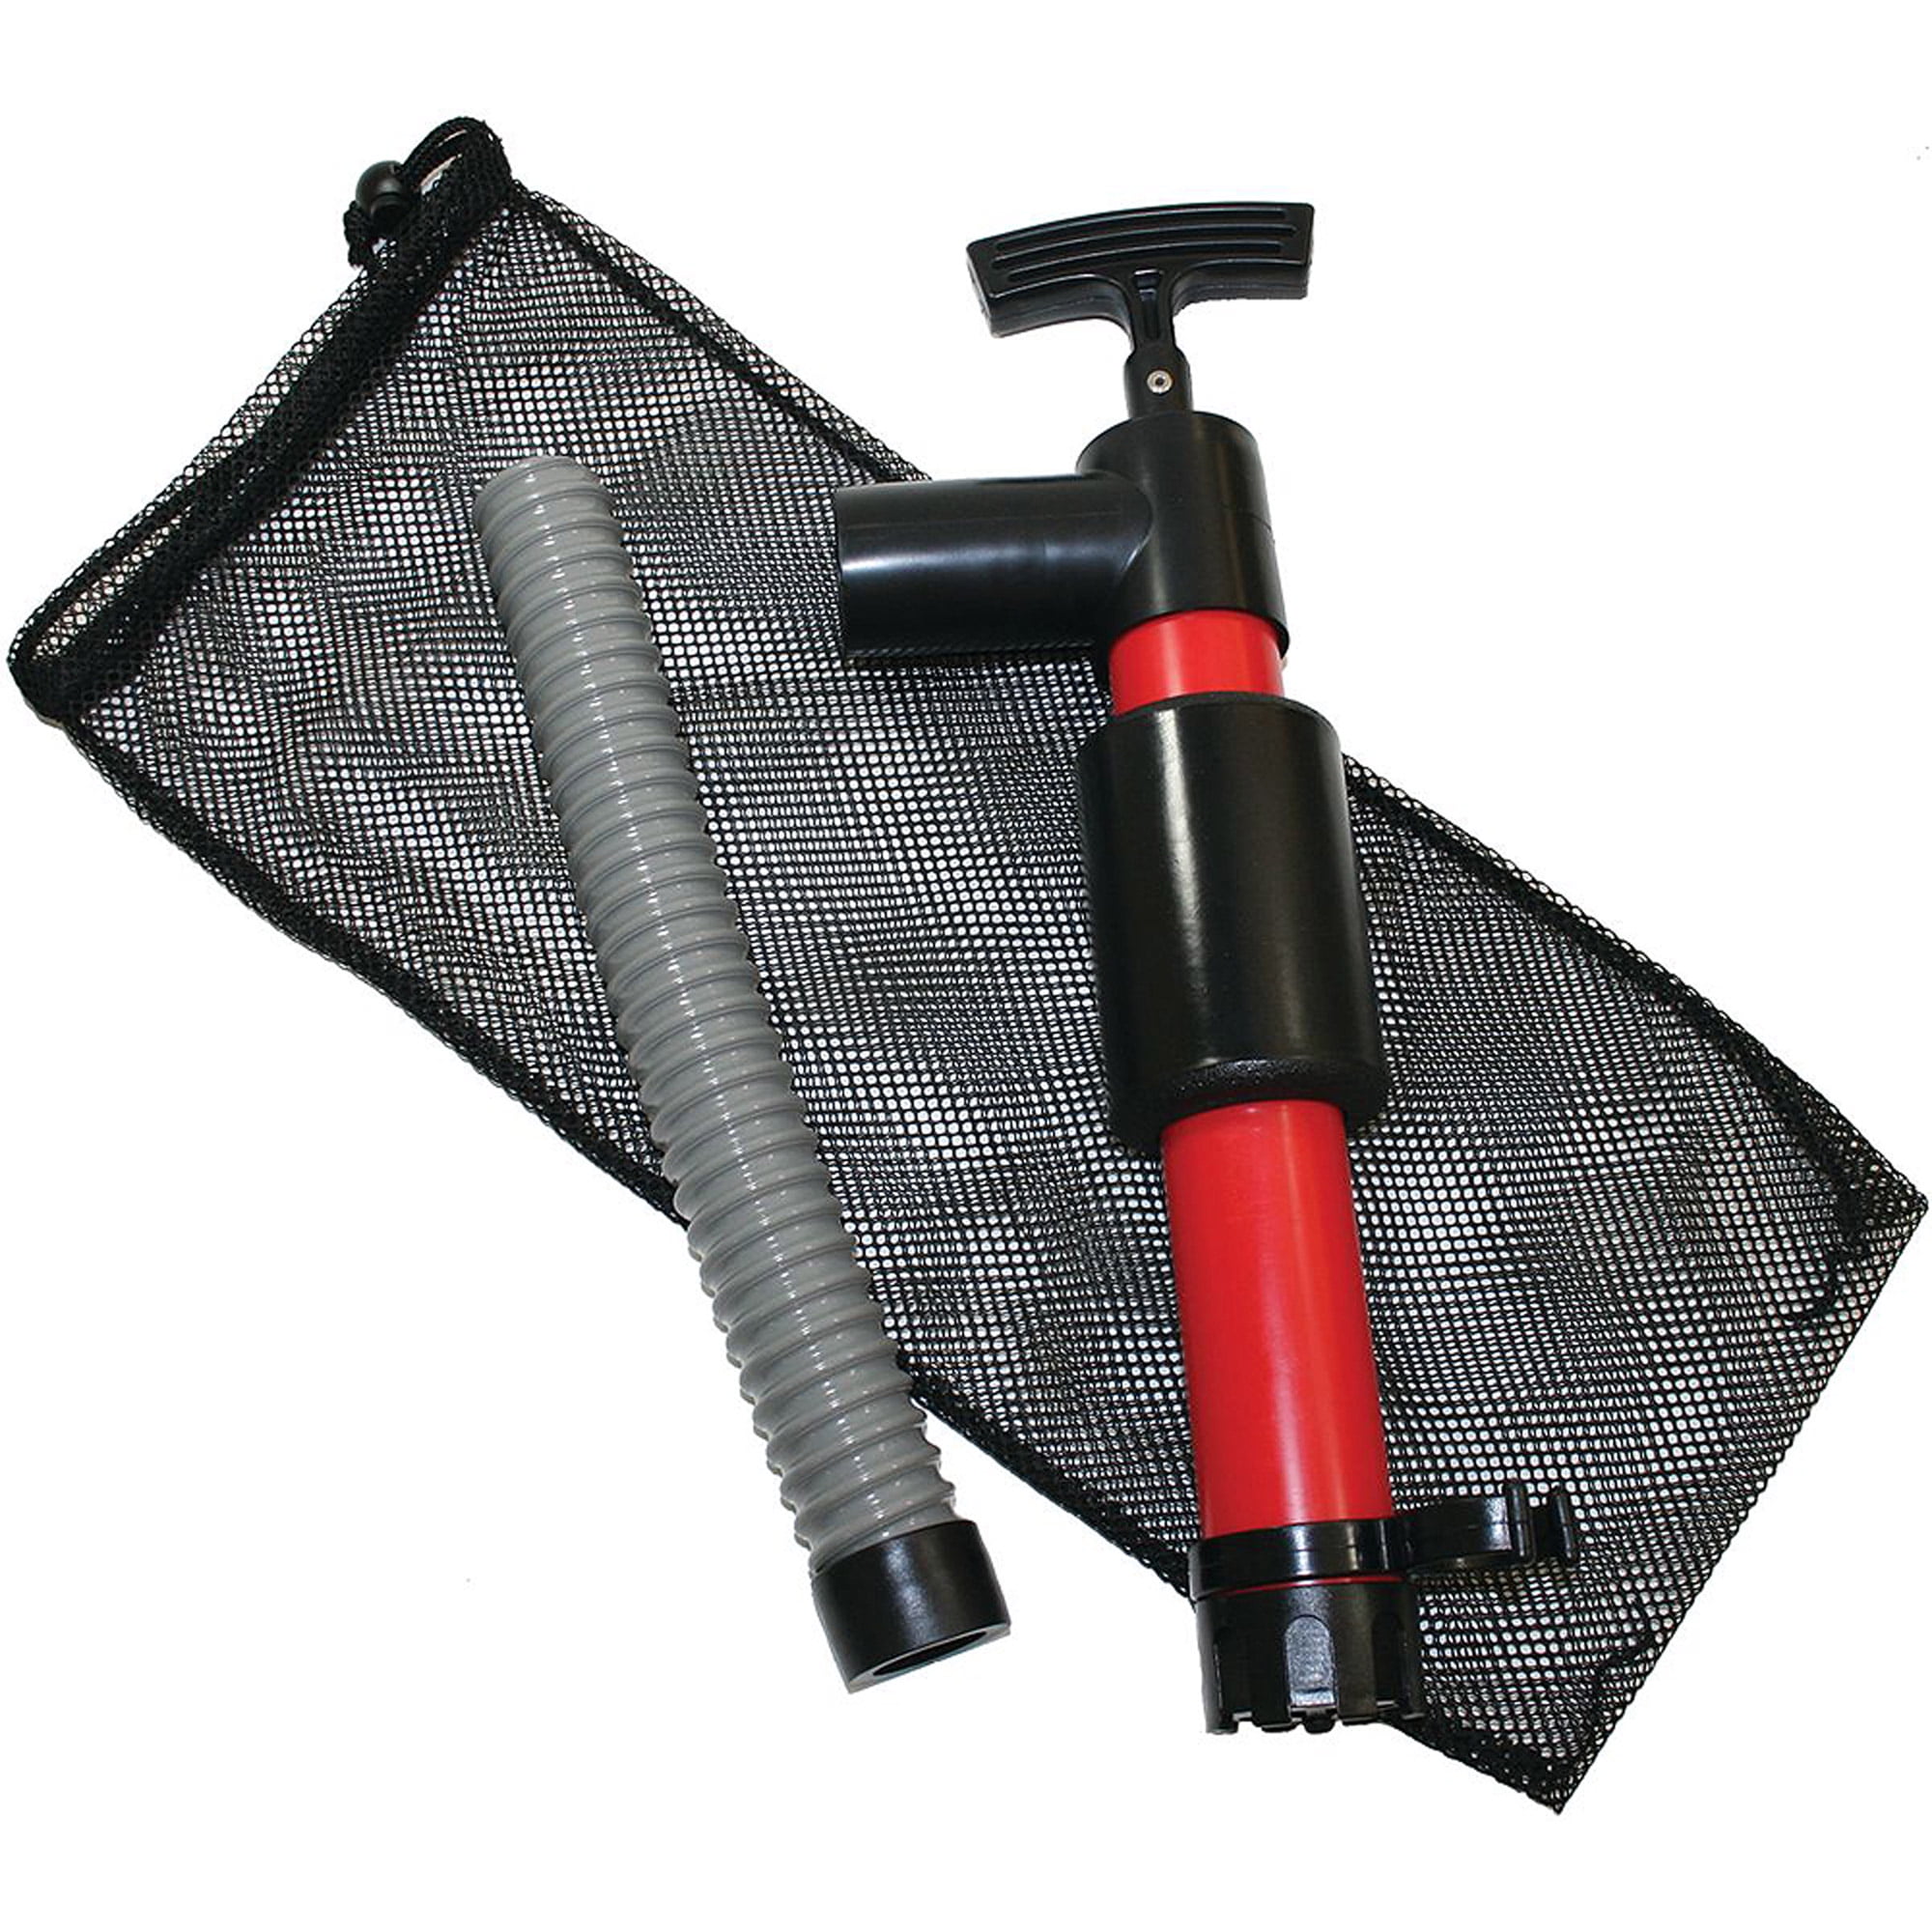 New Kayak Hand Bilge Pump with flotation sleeve by Seattle Sports . 